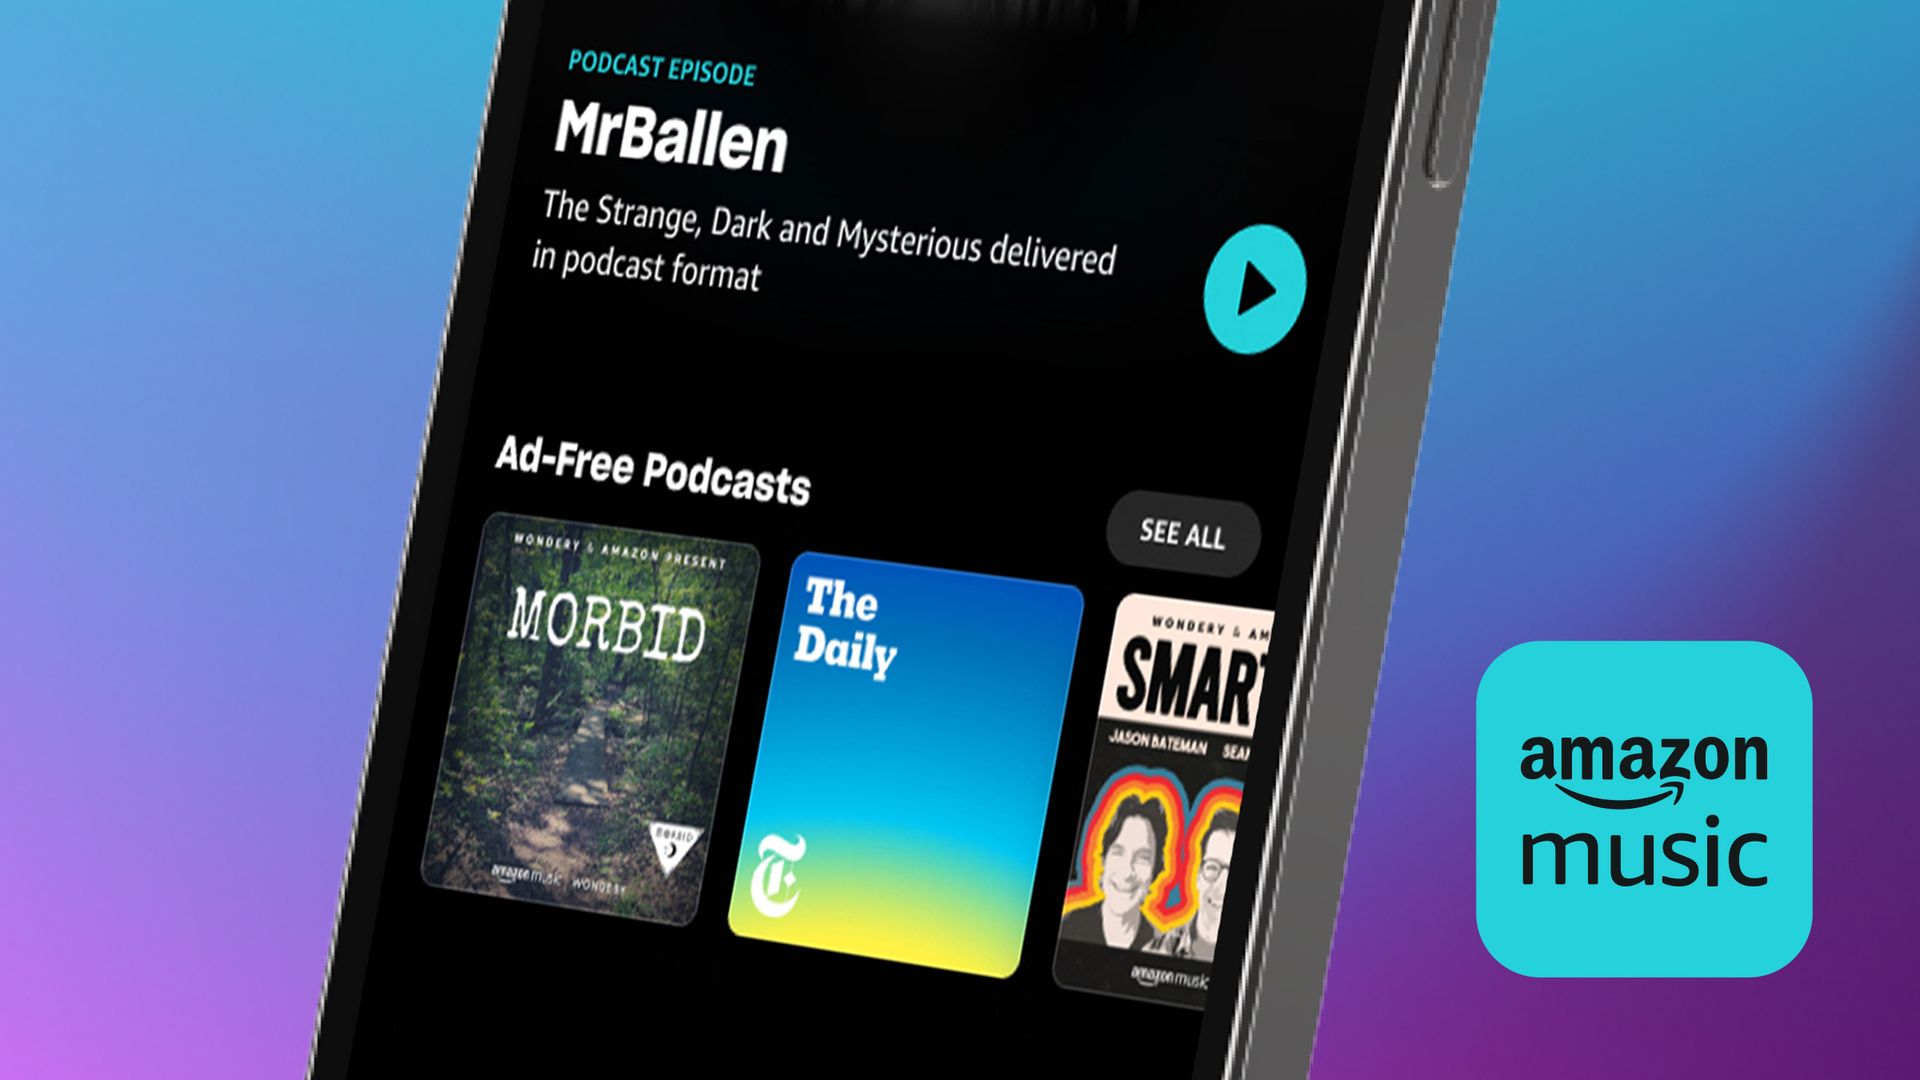 Smartphone with Amazon Music app podcast playing